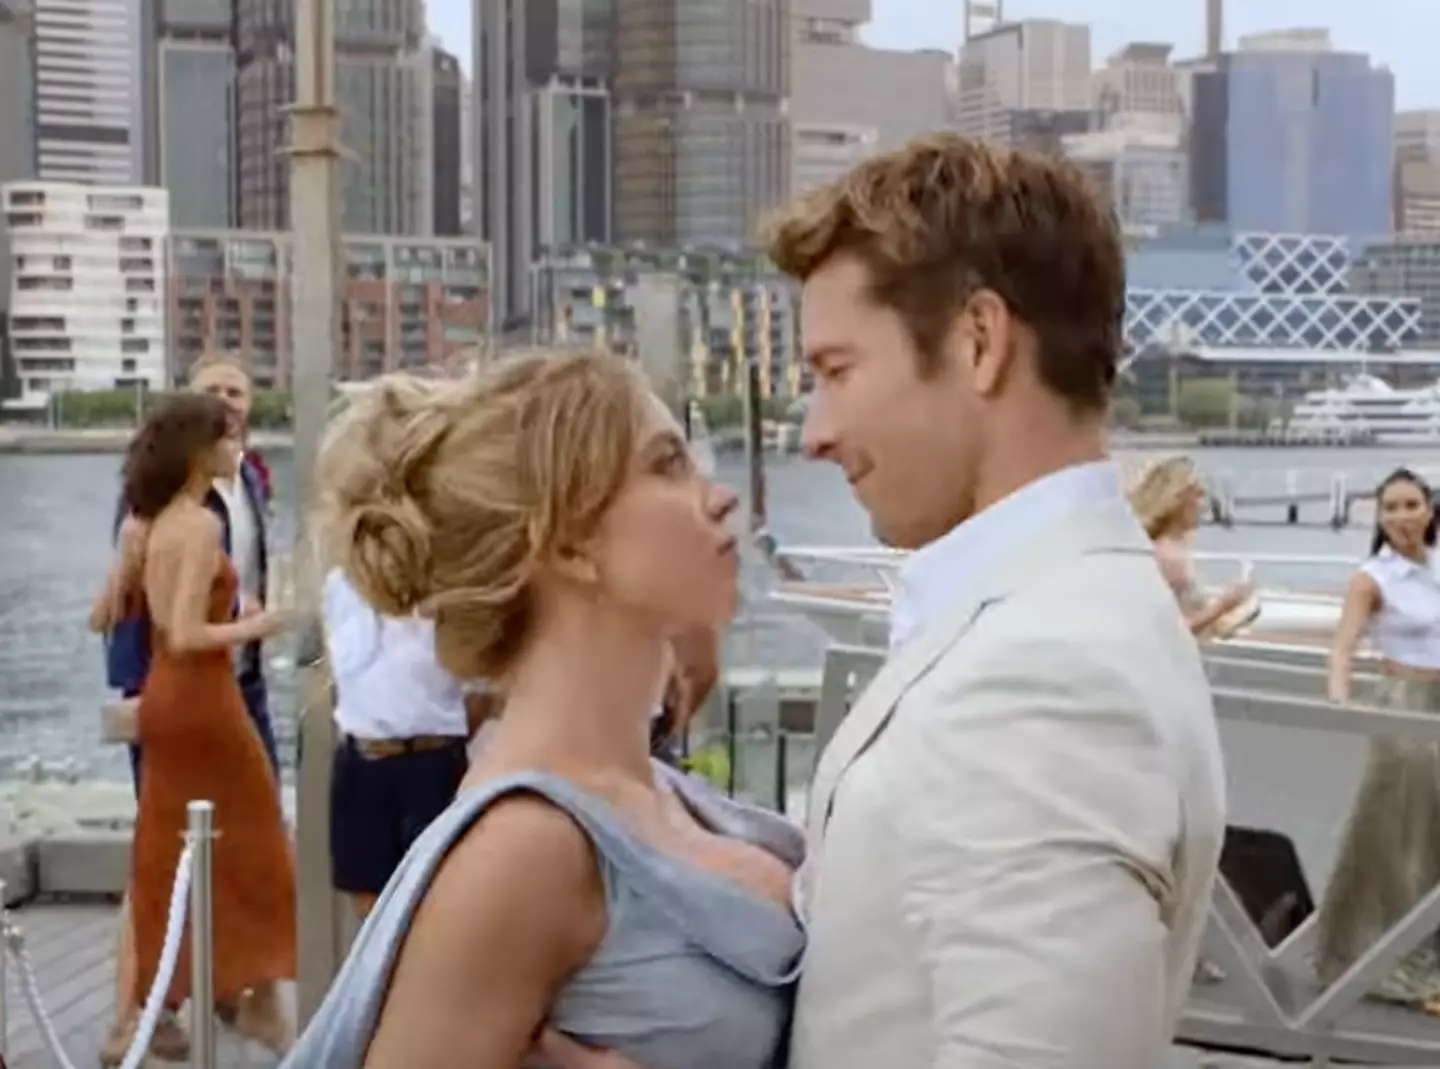 Sydney Sweeney and Glen Powell star as Bea and Ben in the film.